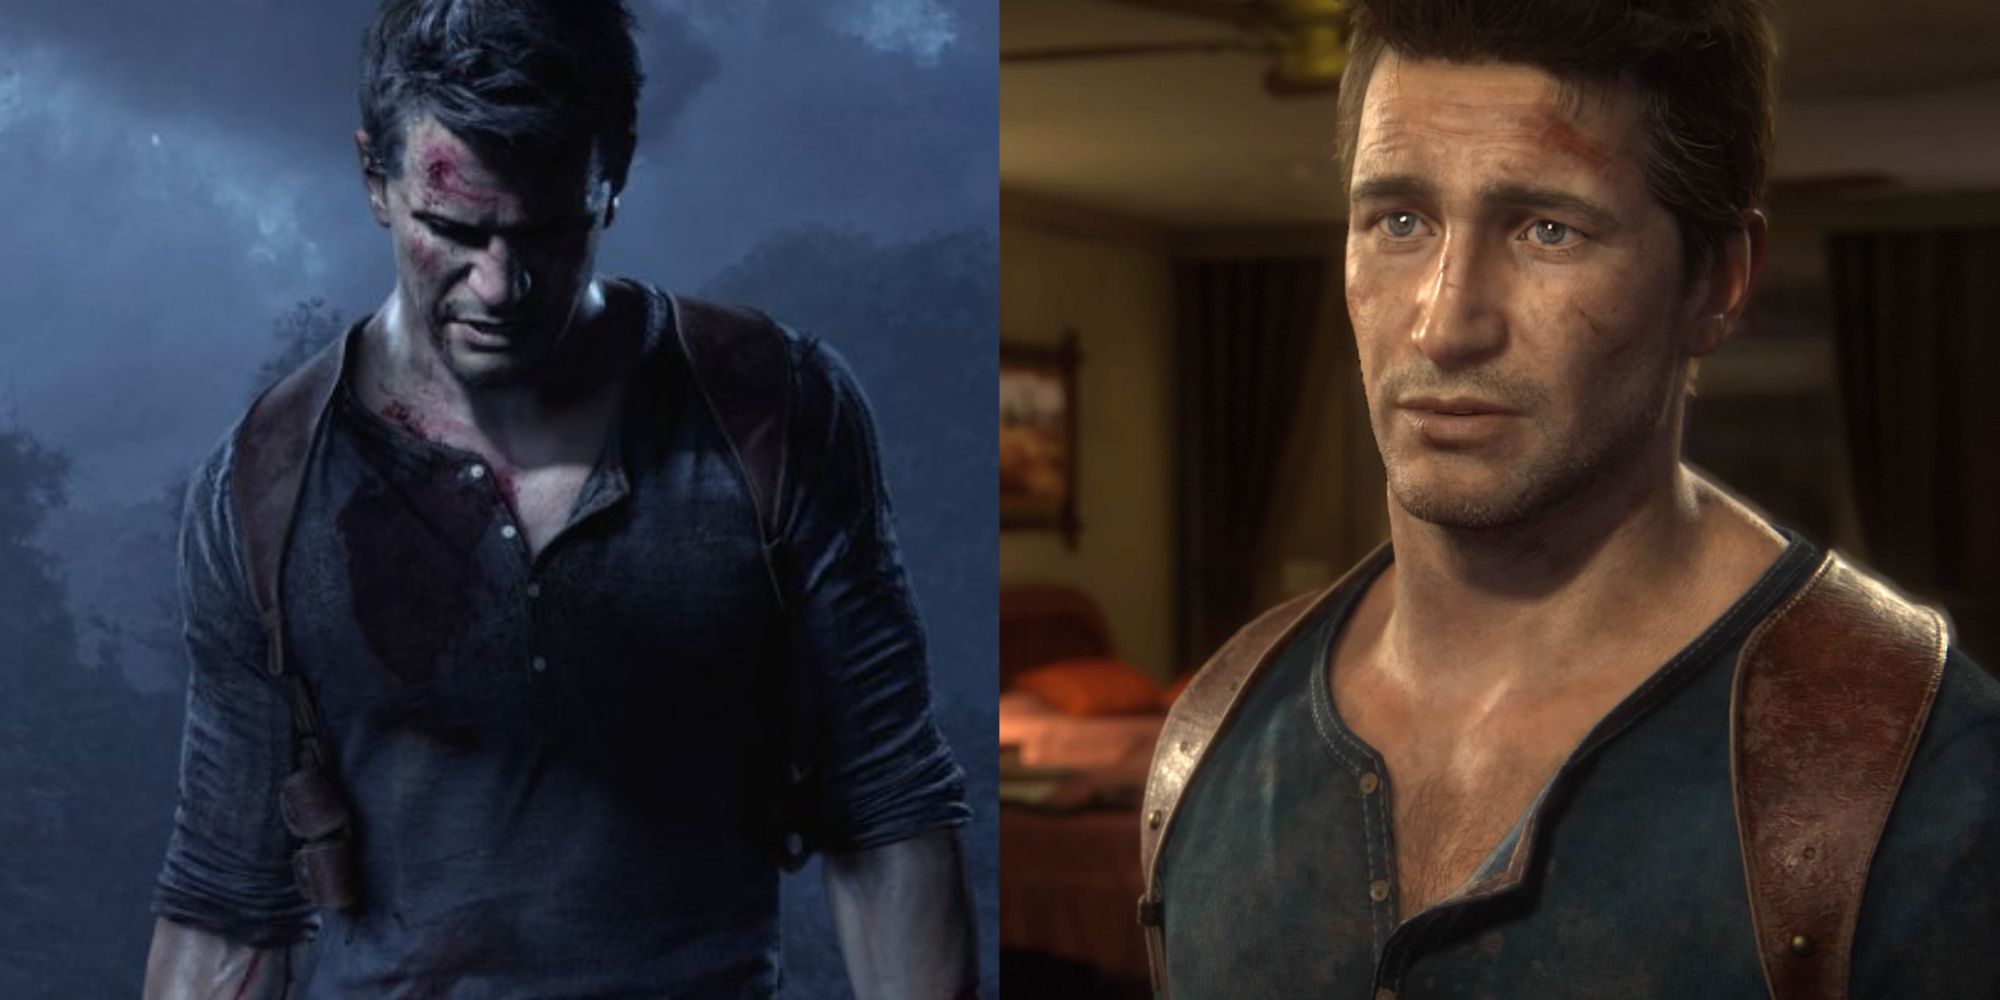 Our hero, the one and only Nathan Drake showcasing contrasting emotions in the image. Voice actor Nolan North delivers excellent vocal range and kills it as Nathan Drake every time.